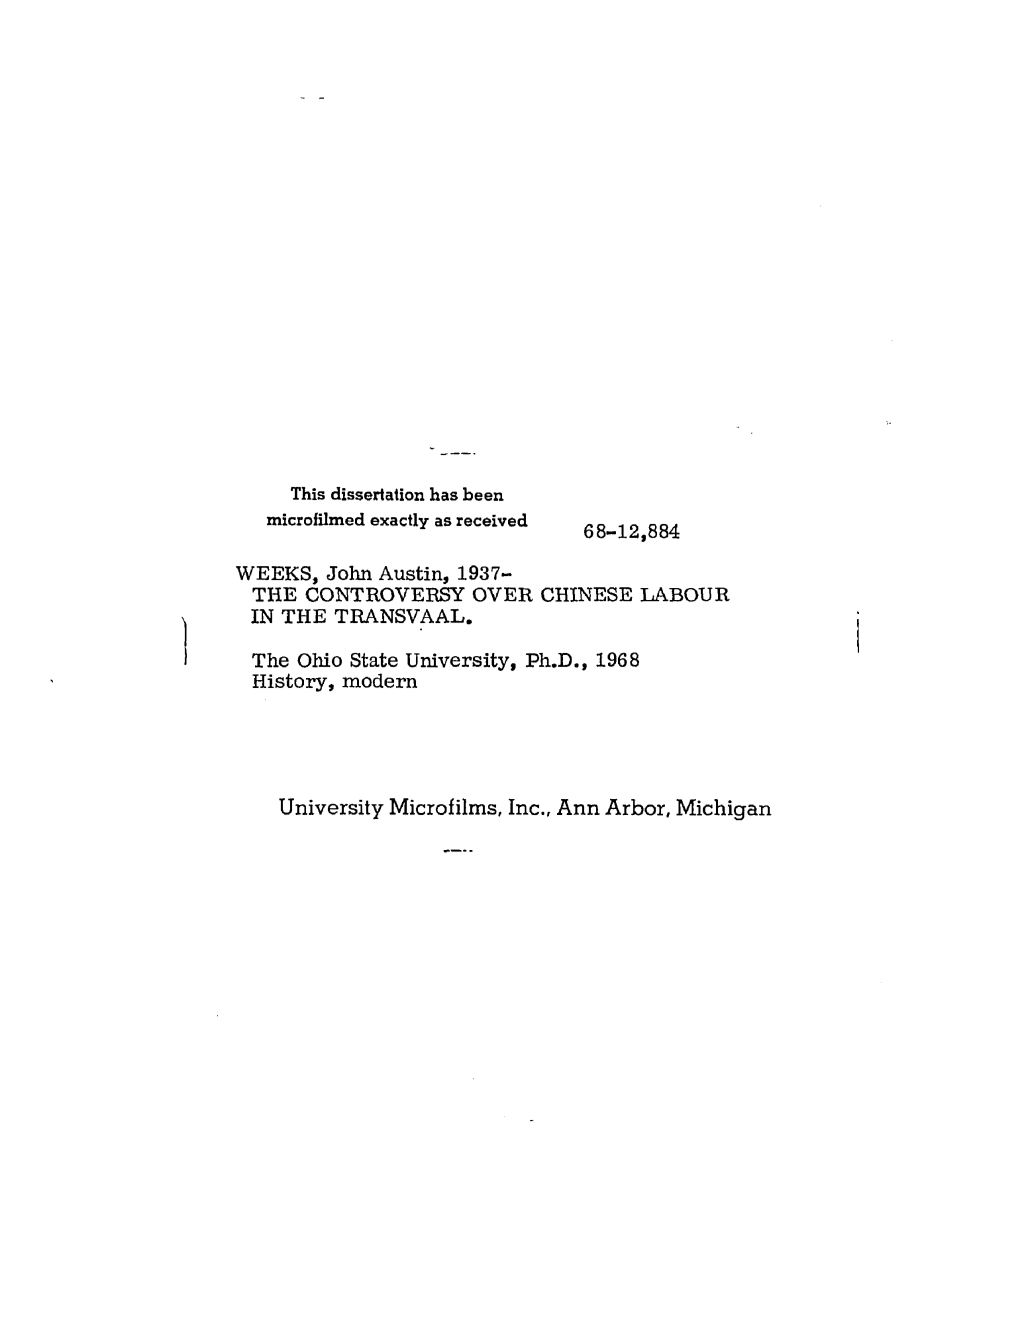 University Microfilms, Inc., Ann Arbor, Michigan the CONTROVERSY OVER CHINESE